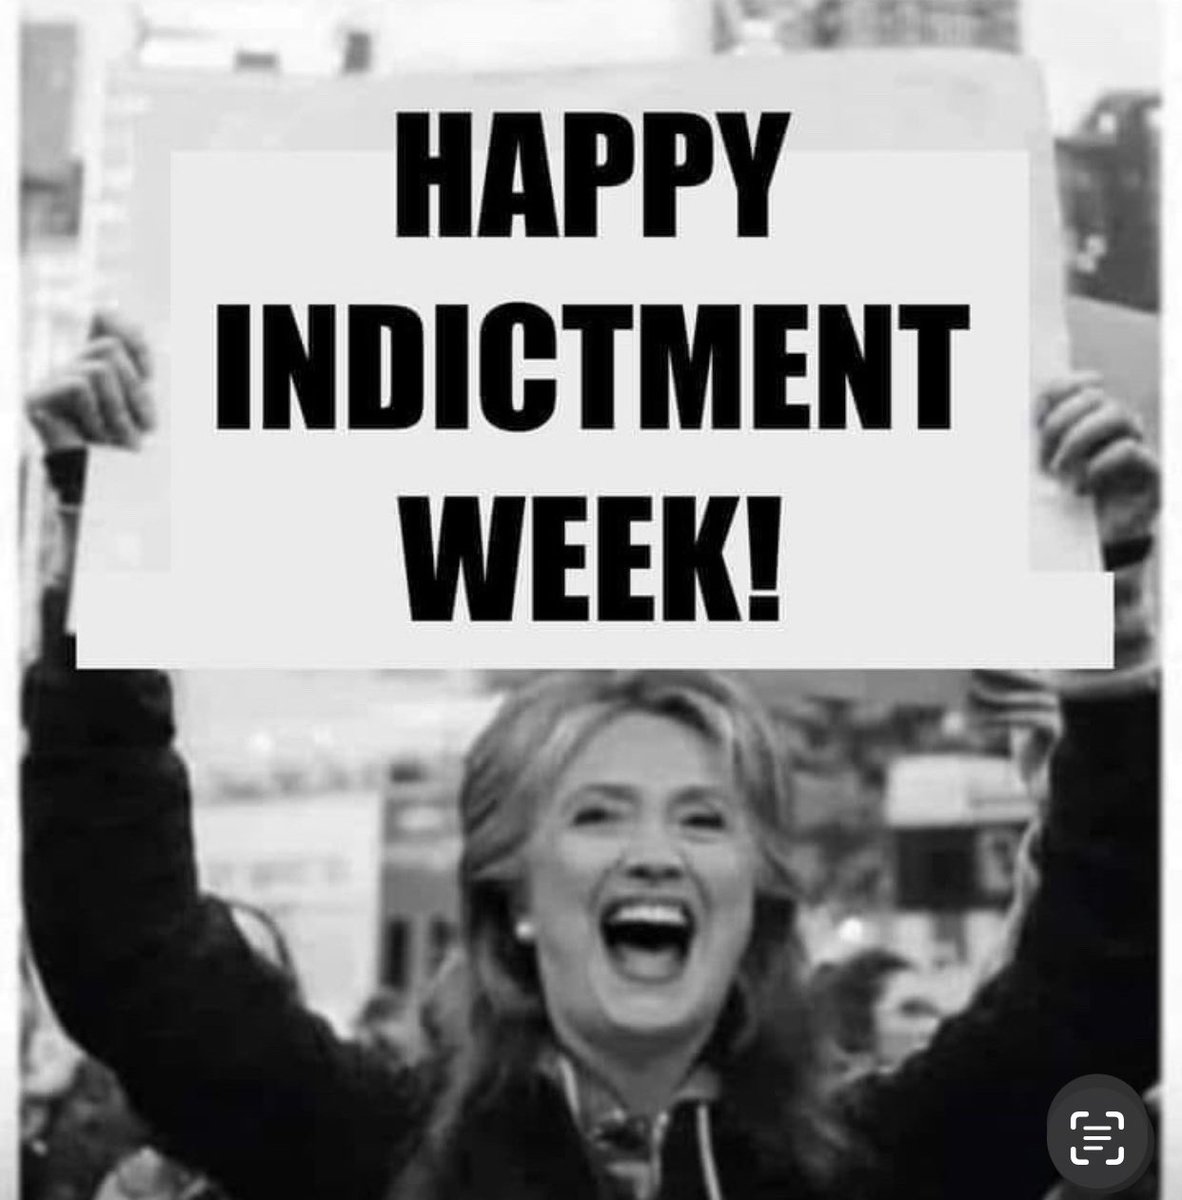 Wow! Georgia criminal grand jury will be indicting Donald Trump on over a dozen charges!
#Indictmentweek #TrumpIsAFelon